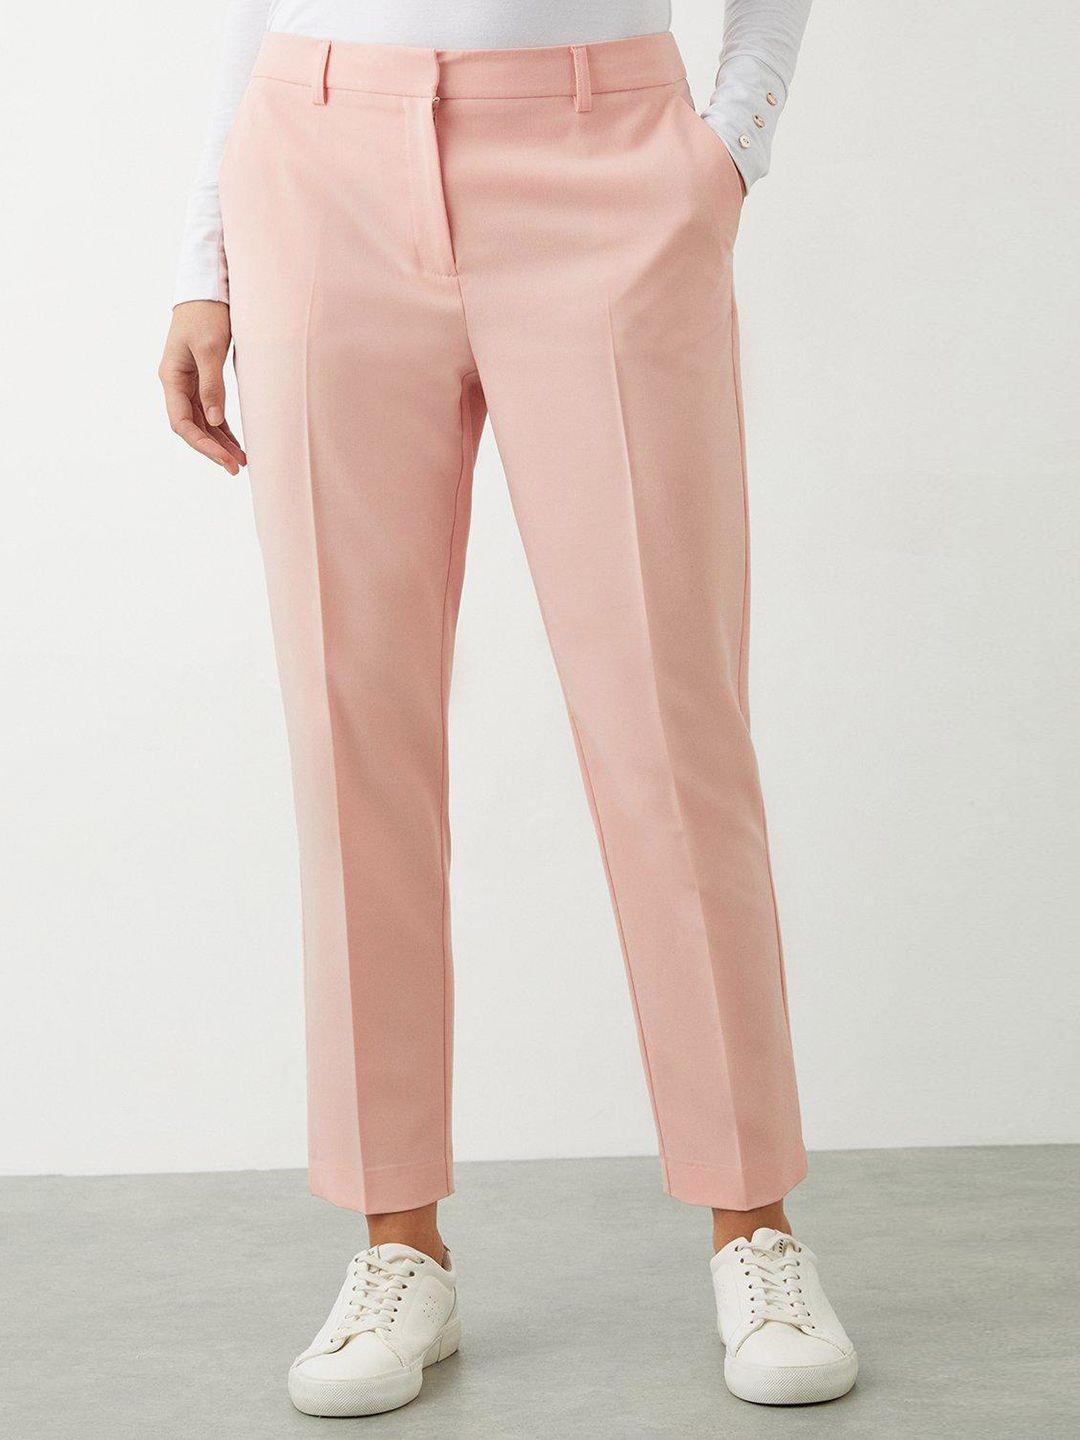 dorothy perkins women slim fit ankle trousers